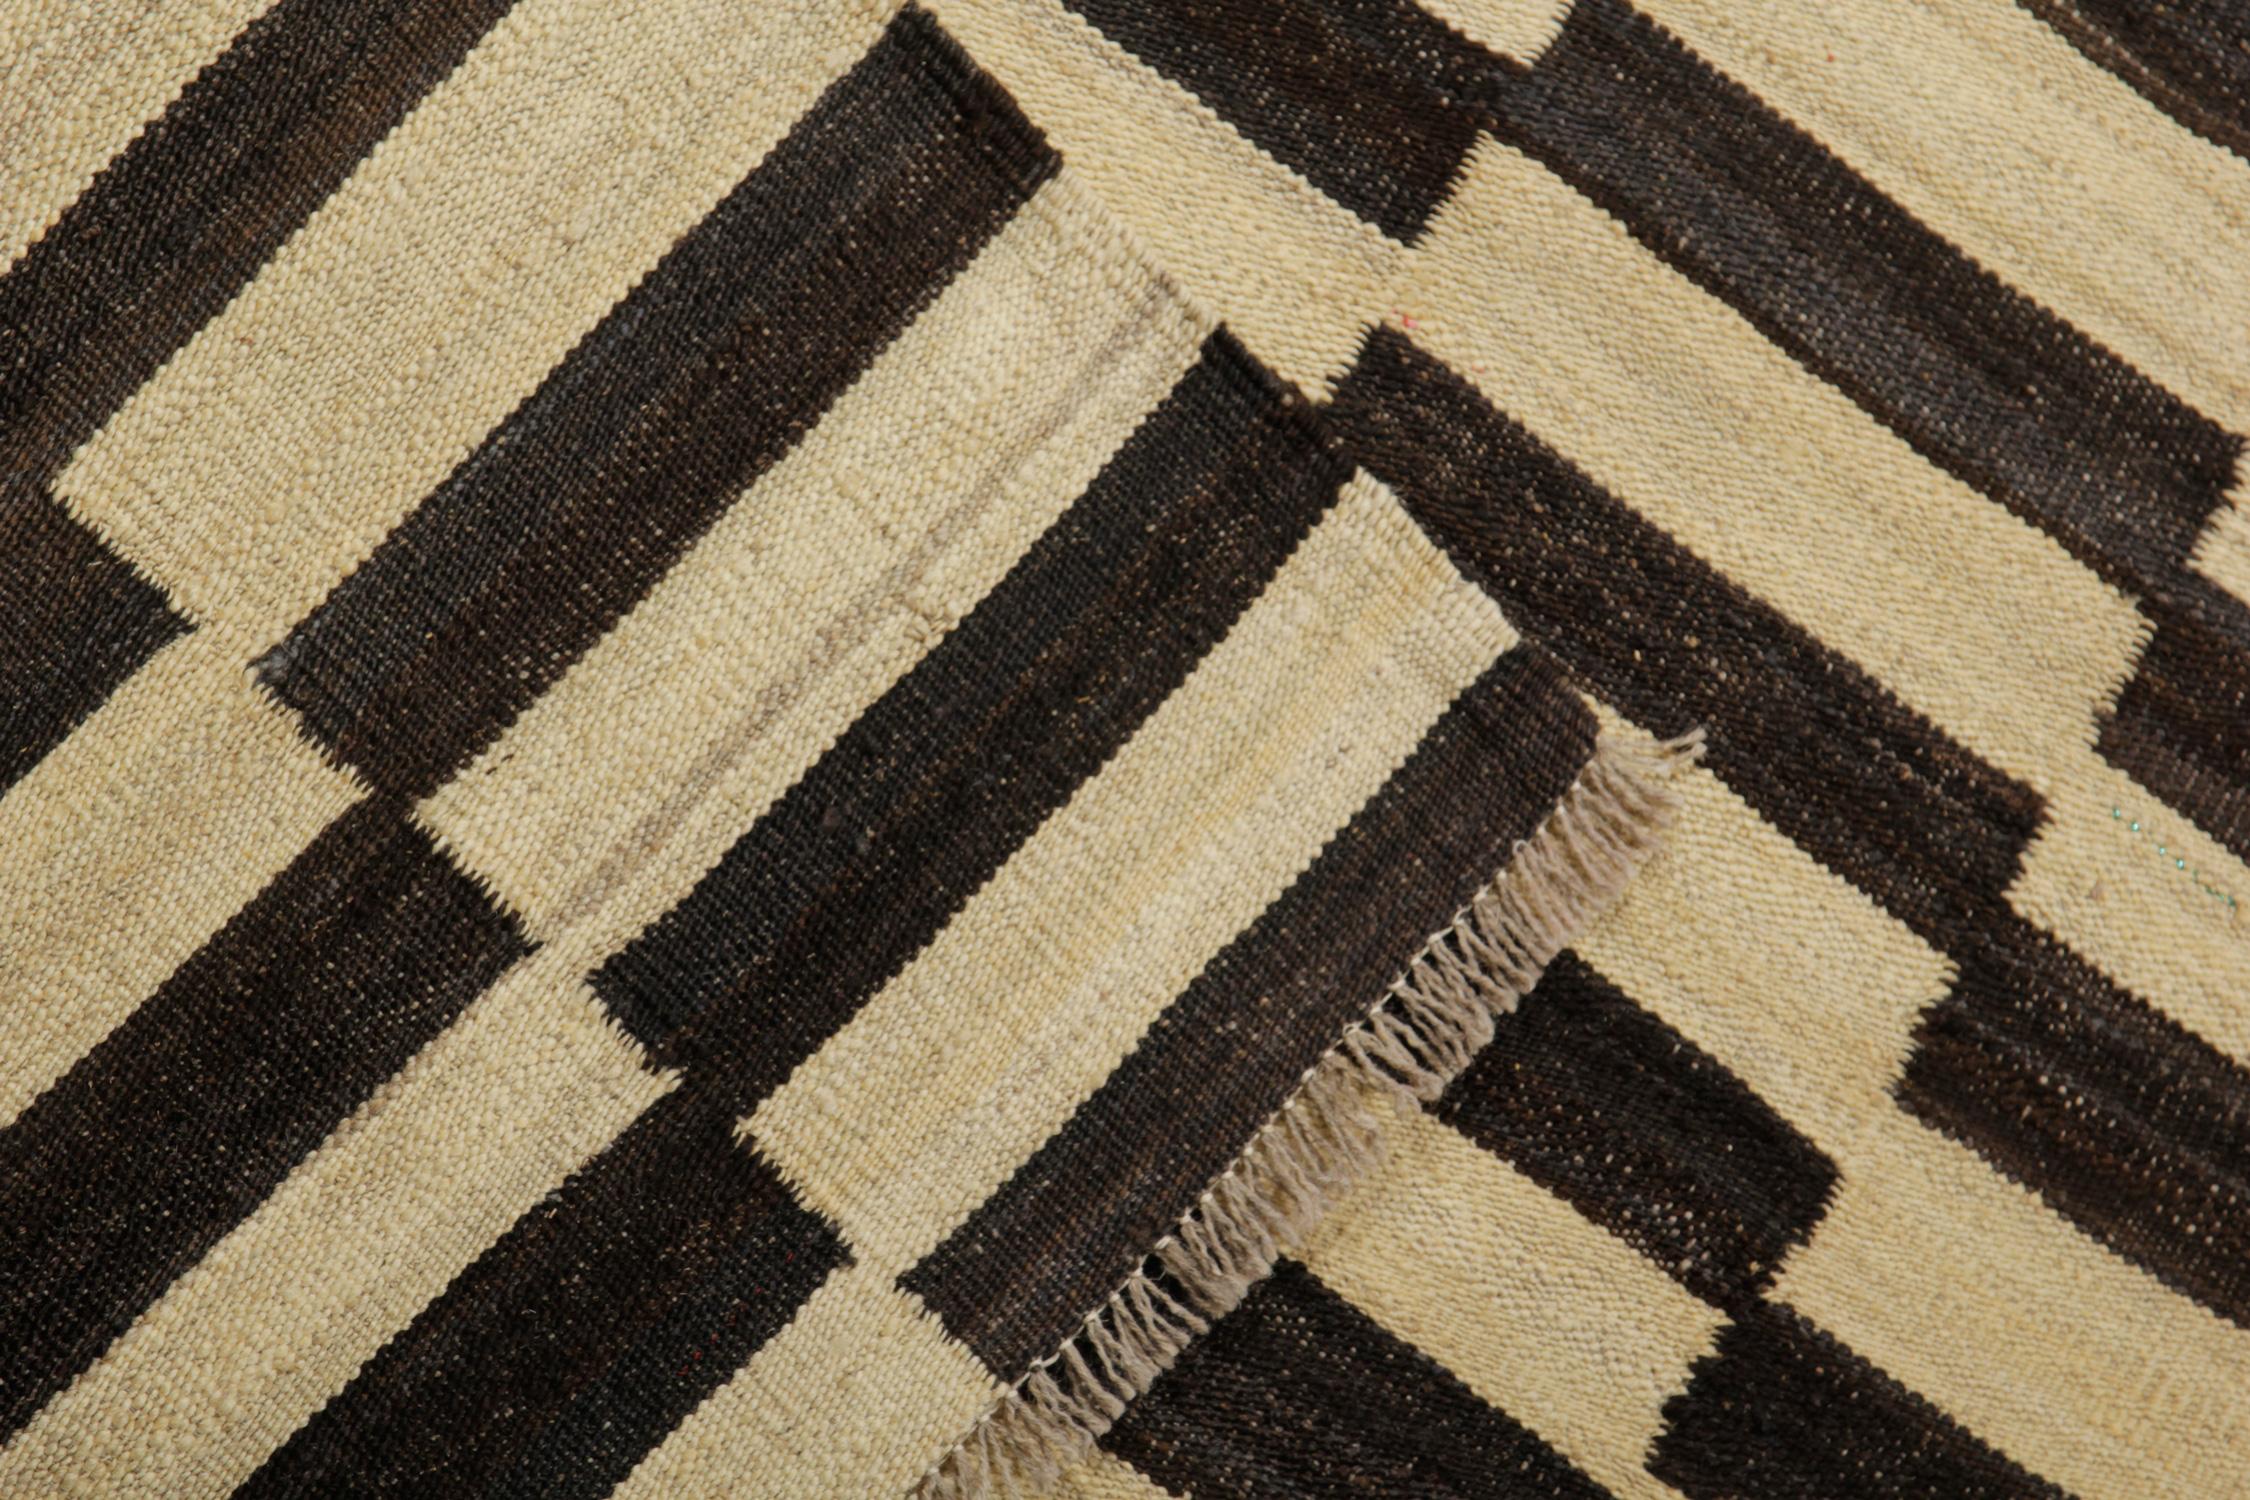 Large Striped Area Rug, Modern Handmade Kilim Carpet Black and Cream In New Condition For Sale In Hampshire, GB